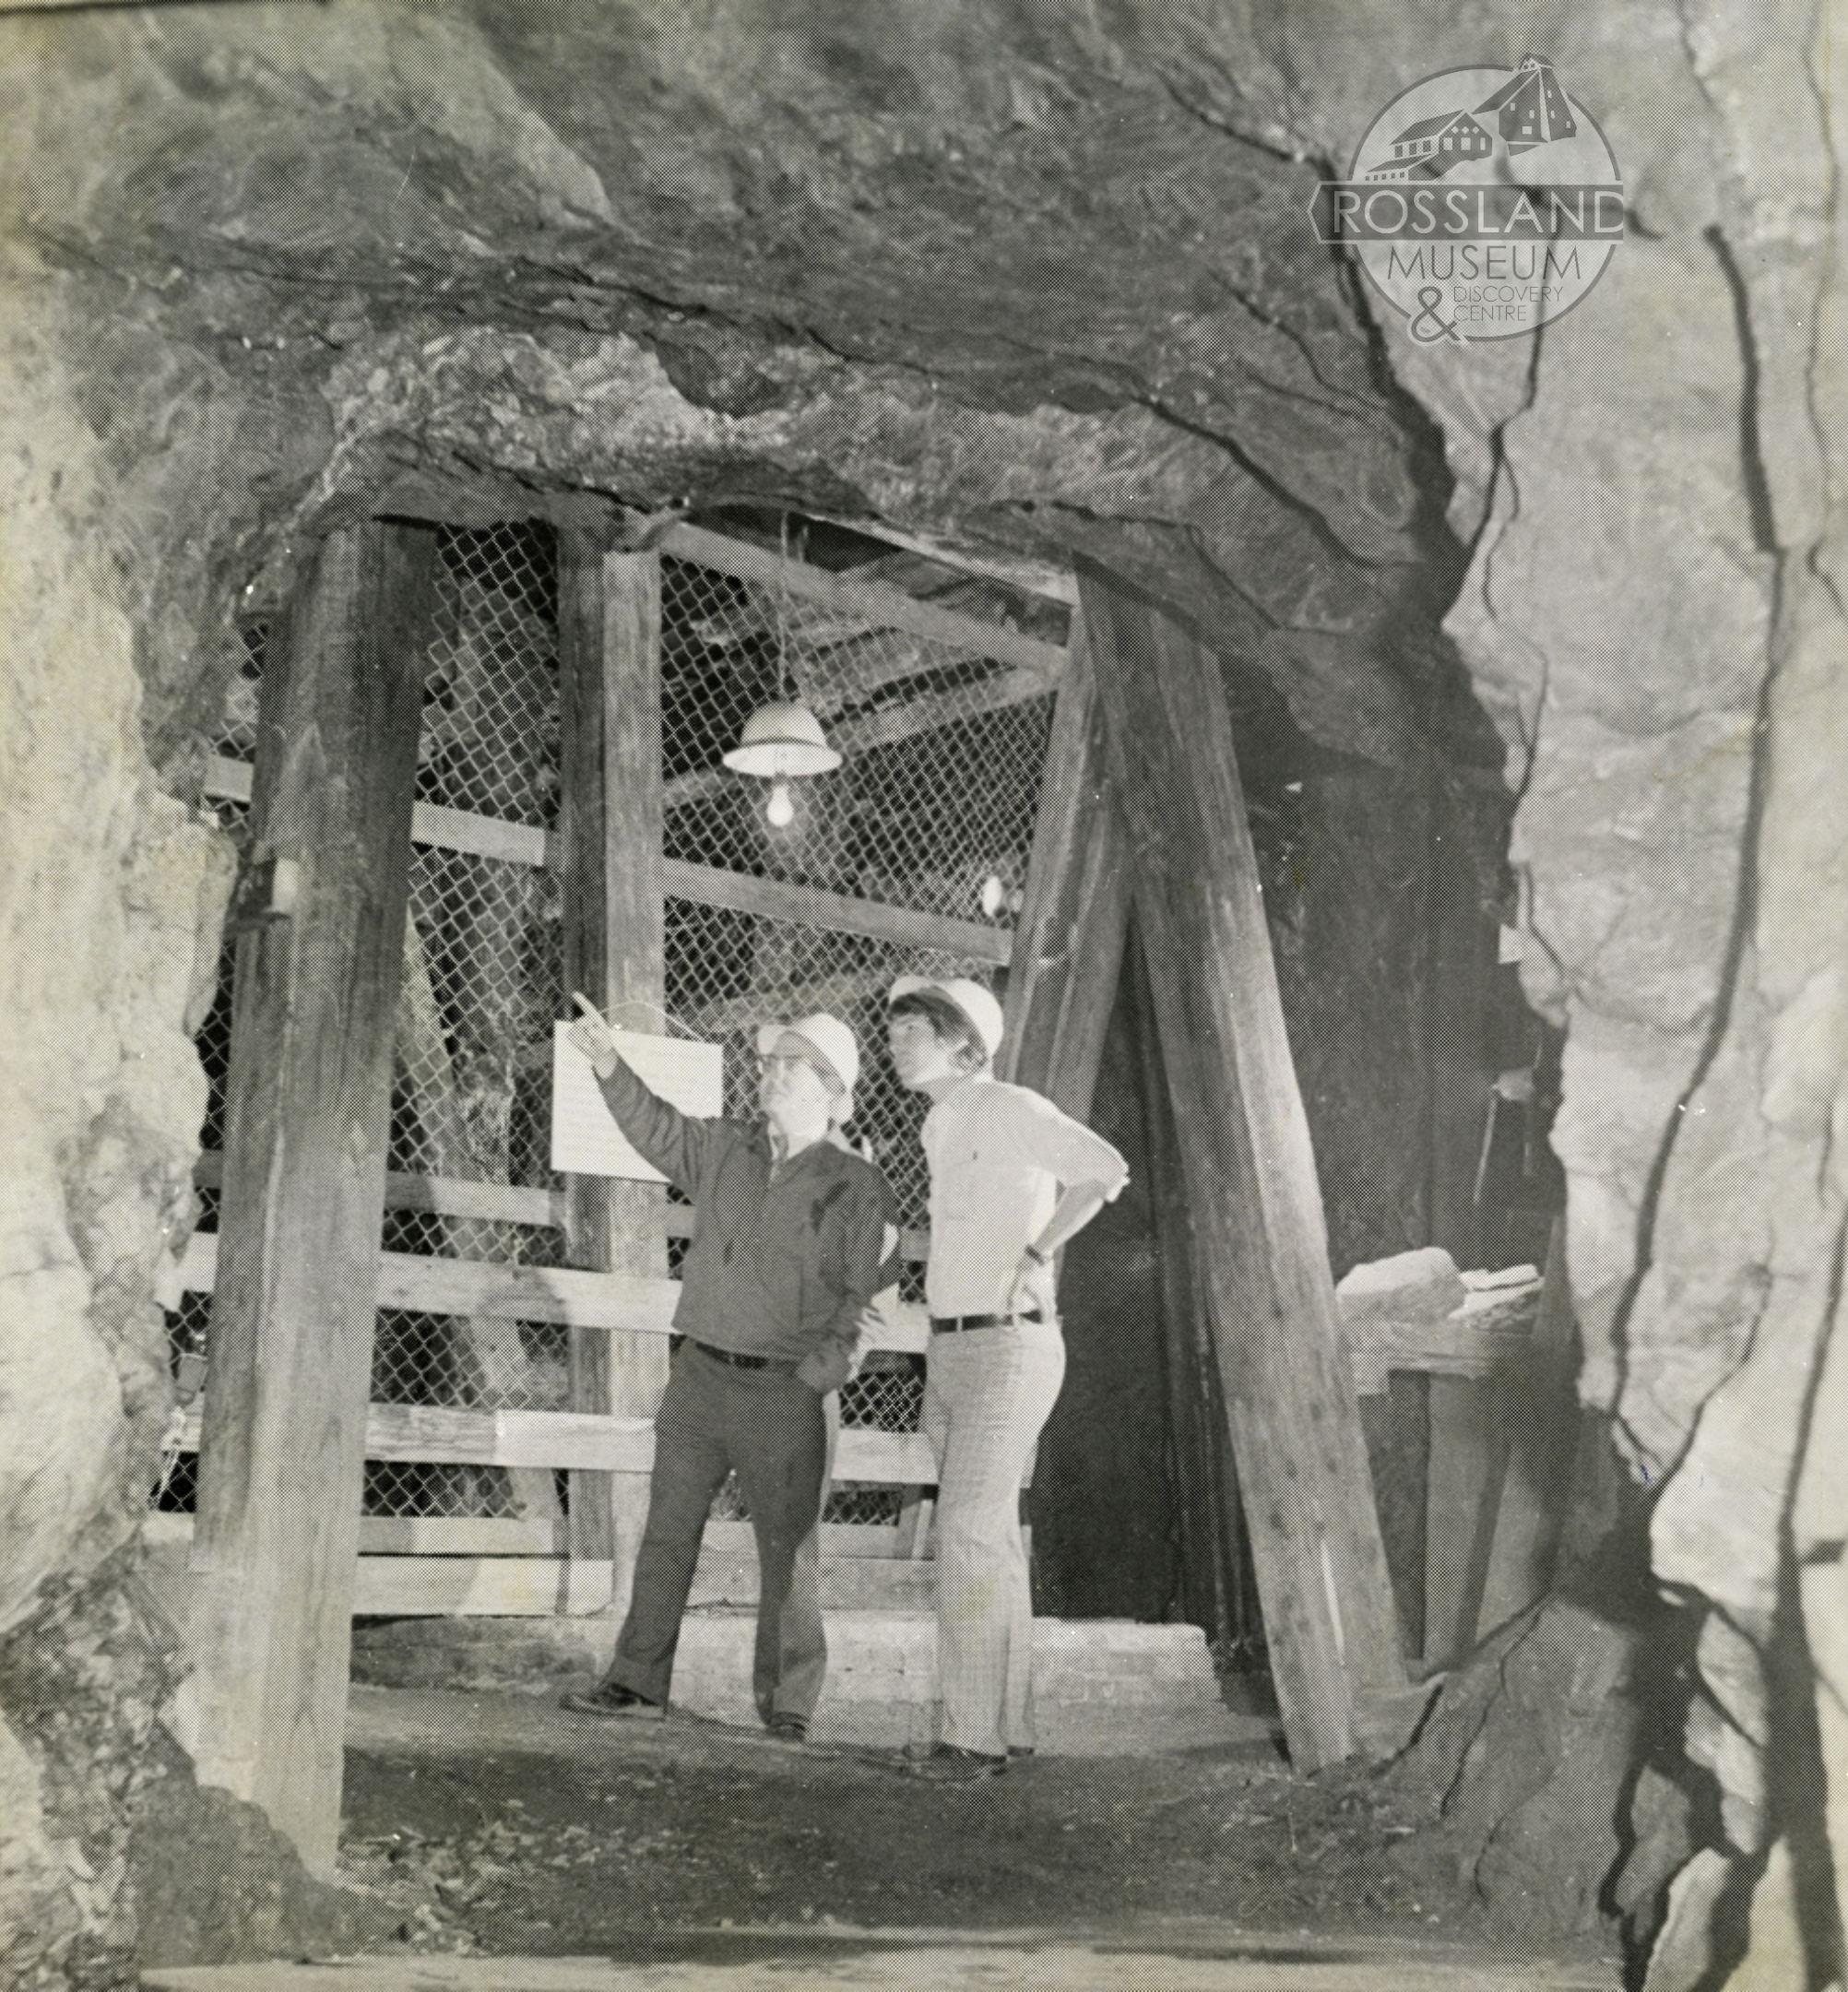 Photo 2276.0247: at the Rossland Museum mine, circa 1970